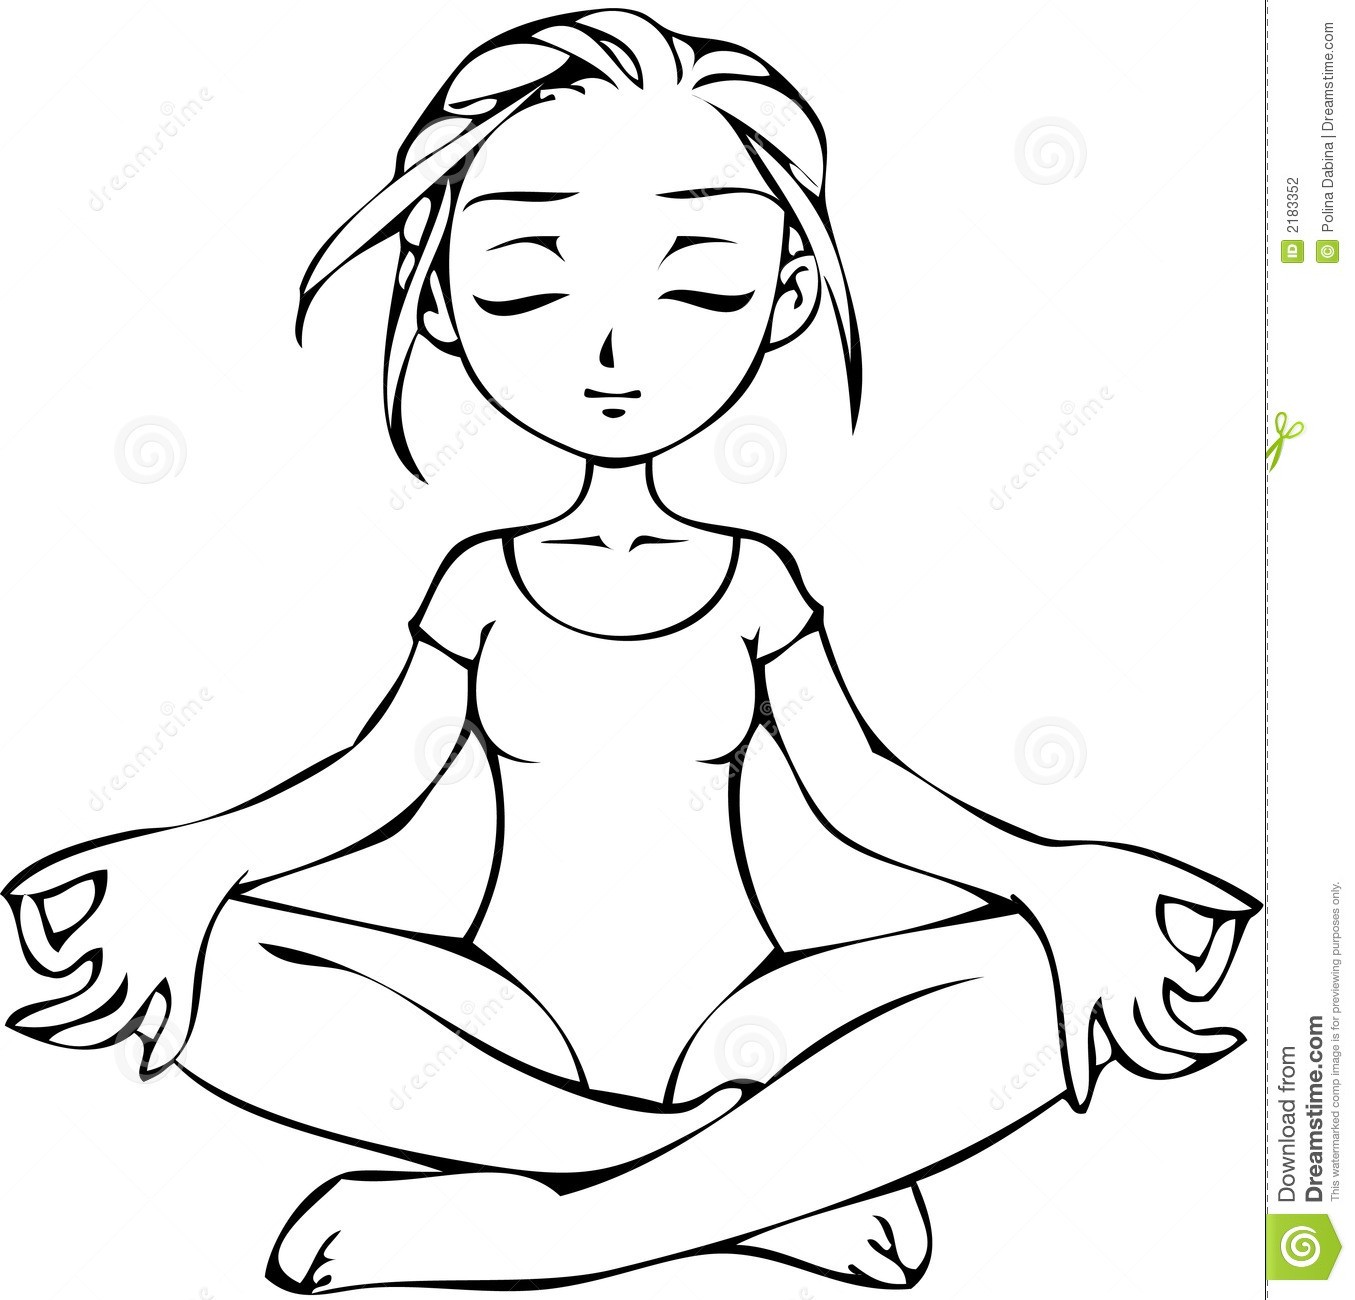 Free Yoga Coloring Pages at GetColorings.com | Free printable colorings